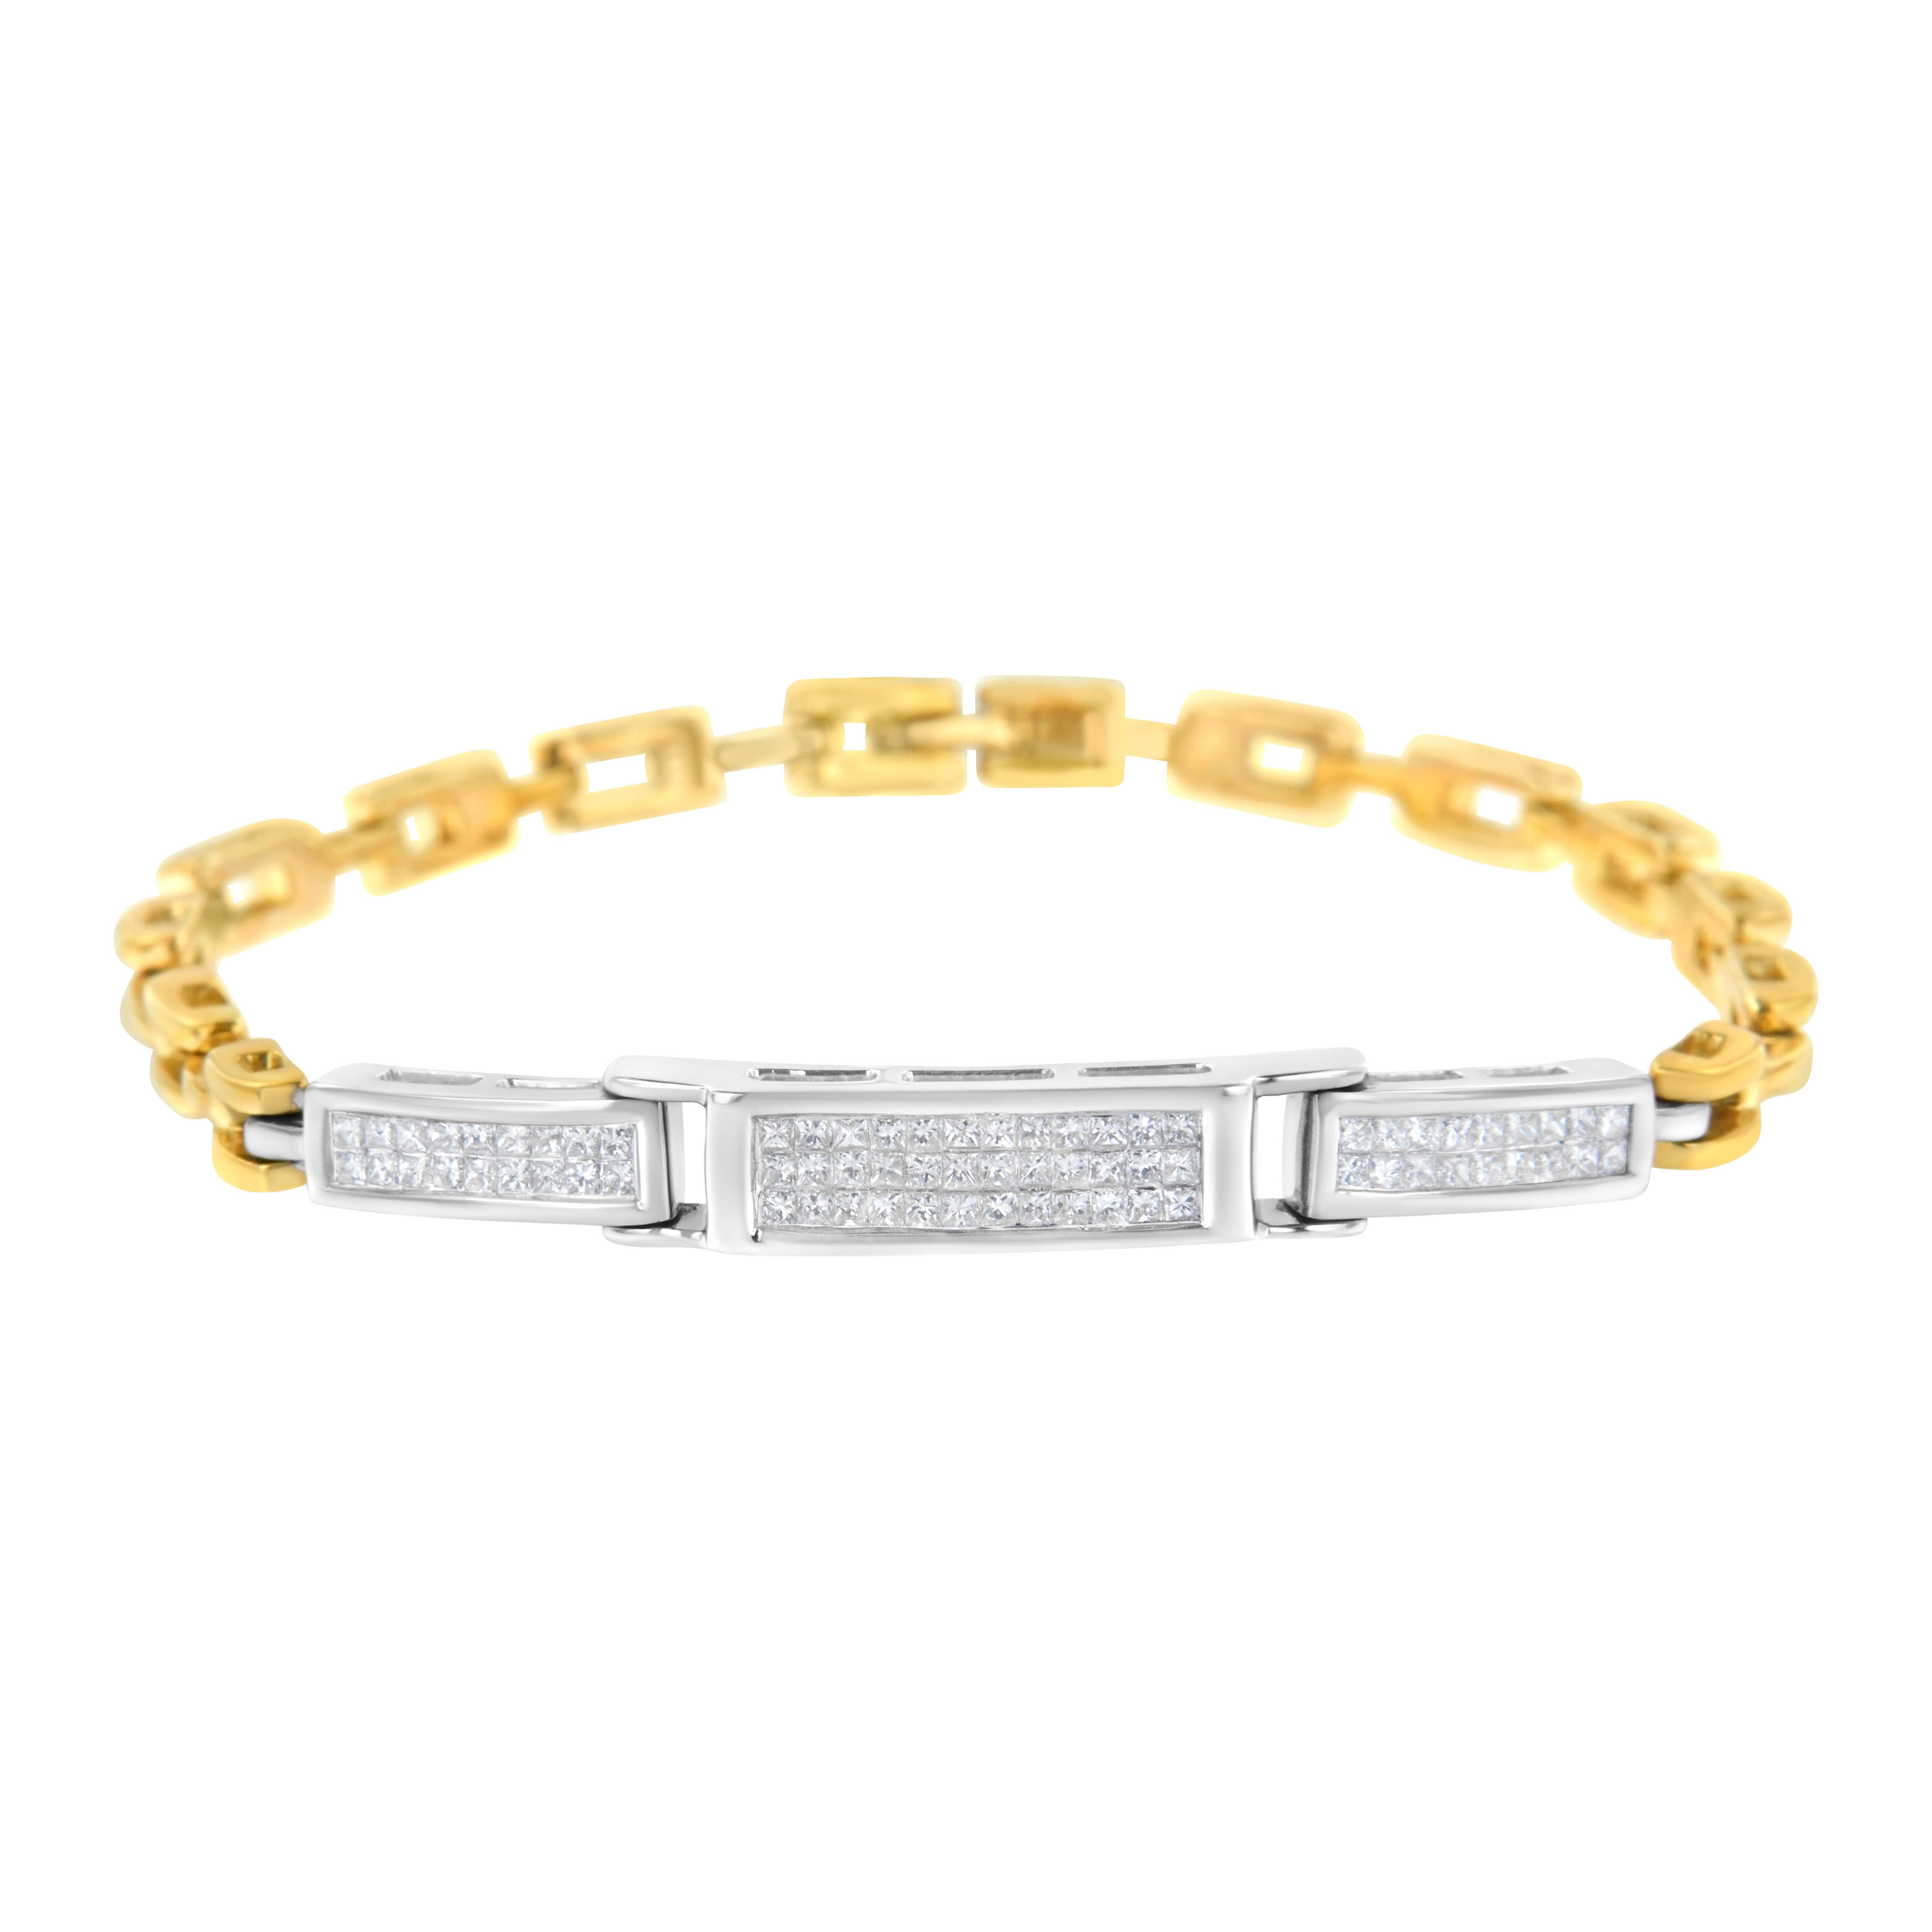 Set yourself apart with this 14k yellow and white gold bracelet. White gold rectangular shapes inlaid with rows of princess cut diamonds become the centerpiece of this tennis bracelet. A simple warm yellow gold chain complements and completes this